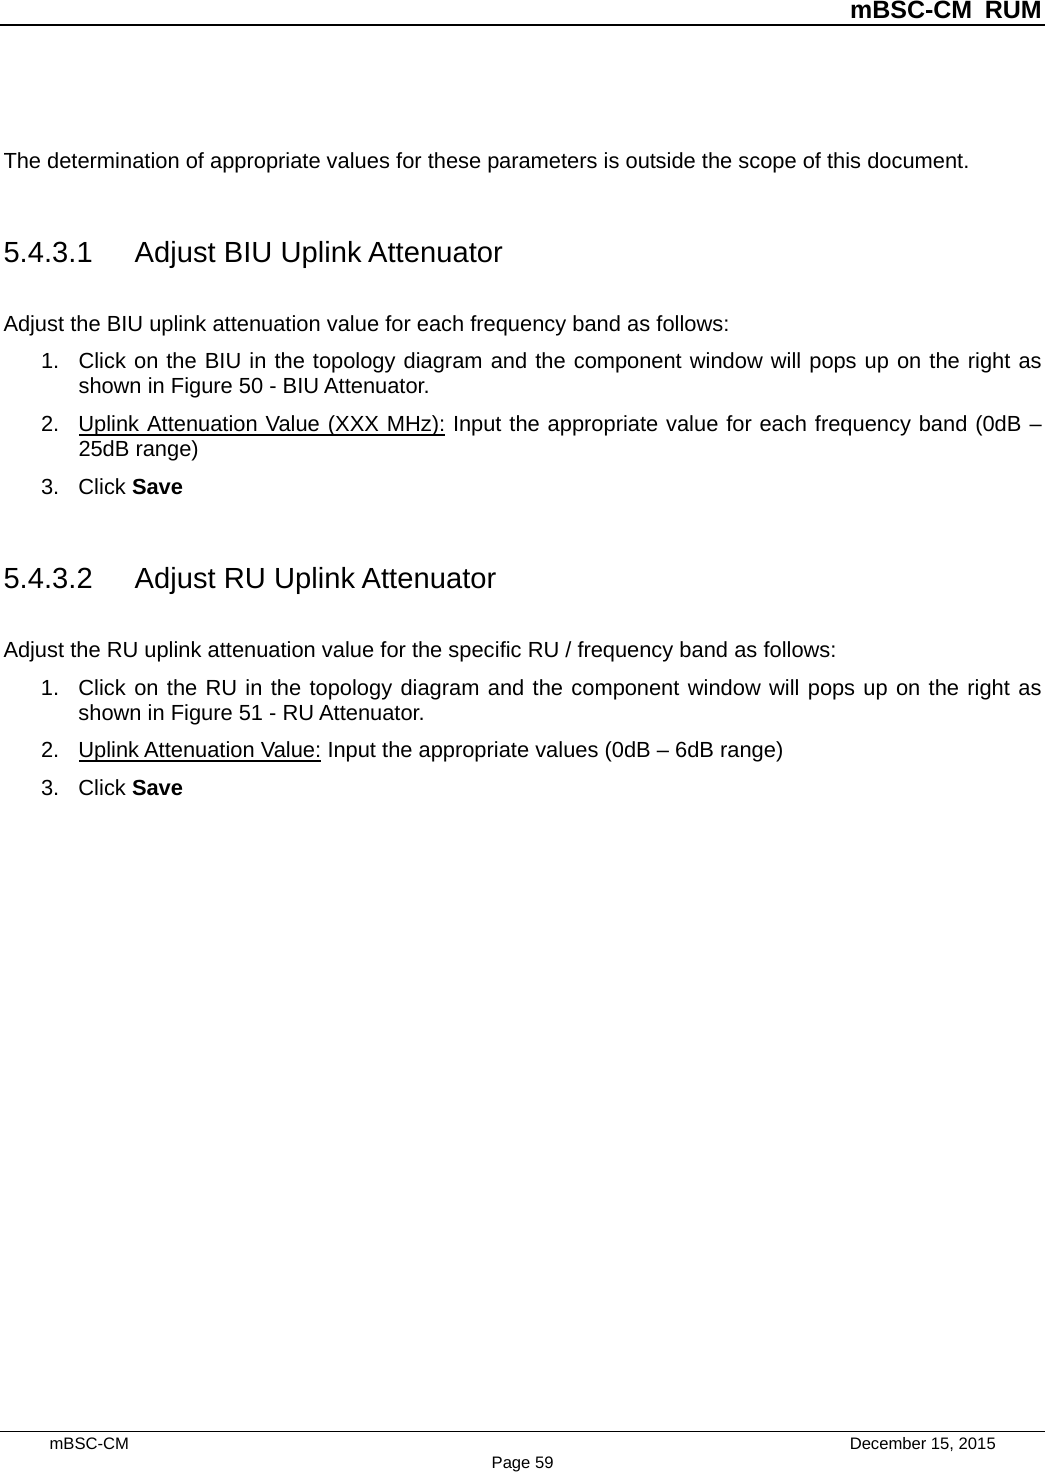          mBSC-CM RUM   mBSC-CM                                 December 15, 2015 Page 59  The determination of appropriate values for these parameters is outside the scope of this document.    5.4.3.1 Adjust BIU Uplink Attenuator Adjust the BIU uplink attenuation value for each frequency band as follows: 1. Click on the BIU in the topology diagram and the component window will pops up on the right as shown in Figure 50 - BIU Attenuator.   2. Uplink Attenuation Value (XXX MHz): Input the appropriate value for each frequency band (0dB – 25dB range) 3. Click Save  5.4.3.2 Adjust RU Uplink Attenuator Adjust the RU uplink attenuation value for the specific RU / frequency band as follows: 1. Click on the RU in the topology diagram and the component window will pops up on the right as shown in Figure 51 - RU Attenuator.   2. Uplink Attenuation Value: Input the appropriate values (0dB – 6dB range) 3. Click Save  